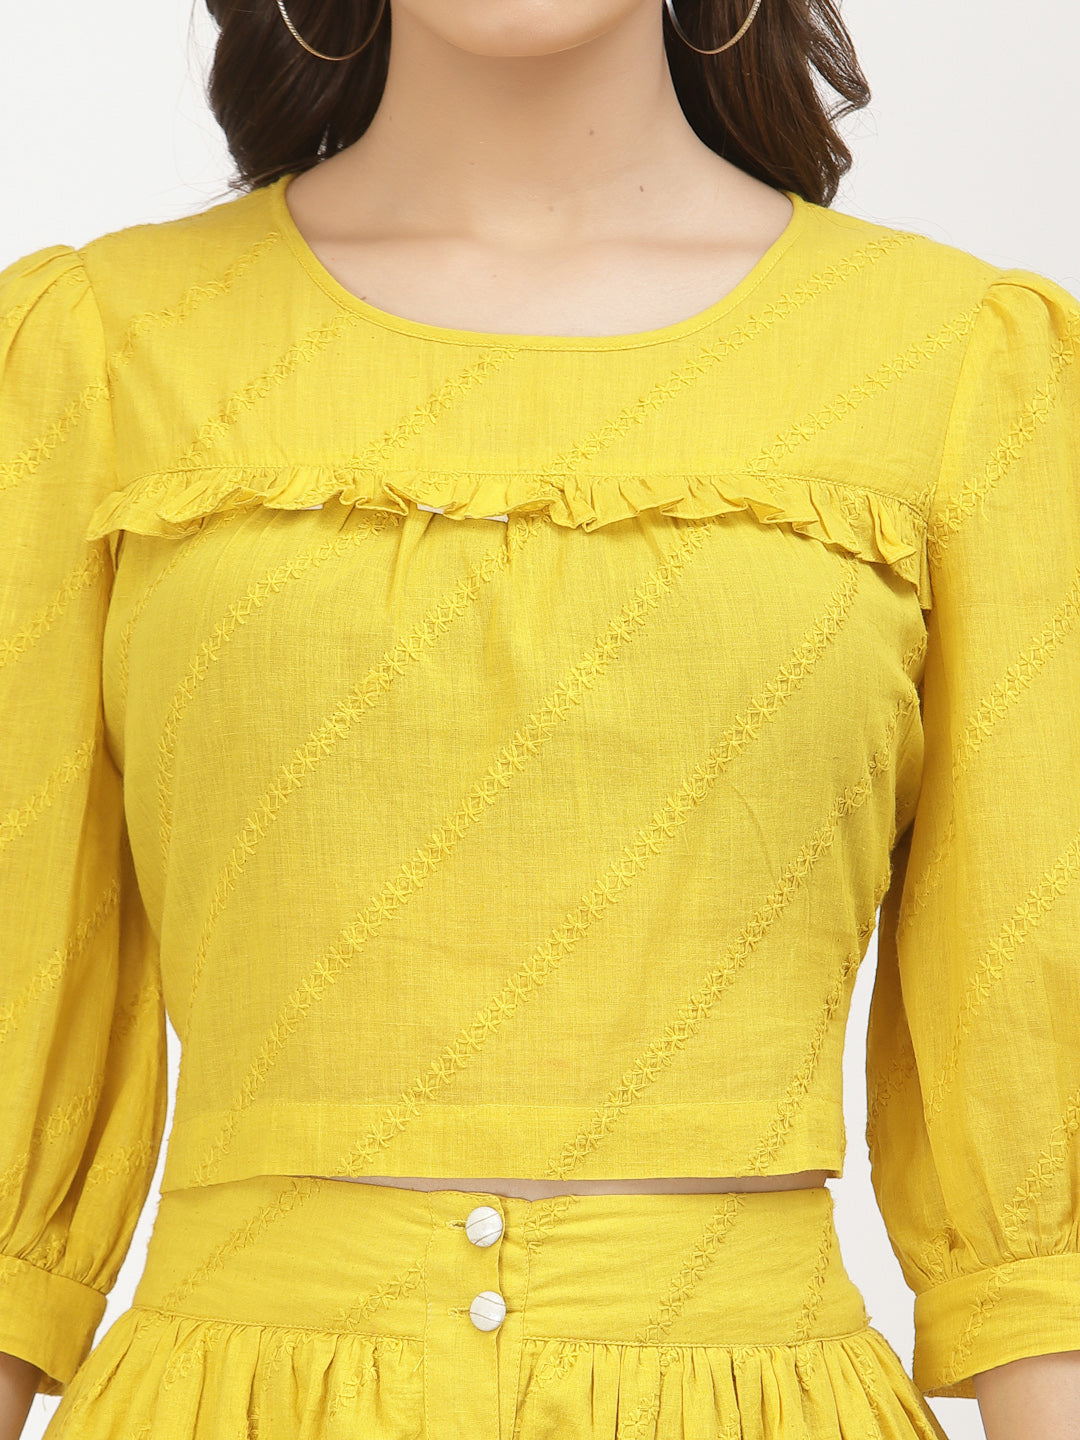 Terquois Yellow and Blue Self-Design Casual Skirt-Top with gathers Coordinate Sets TERQUOIS   